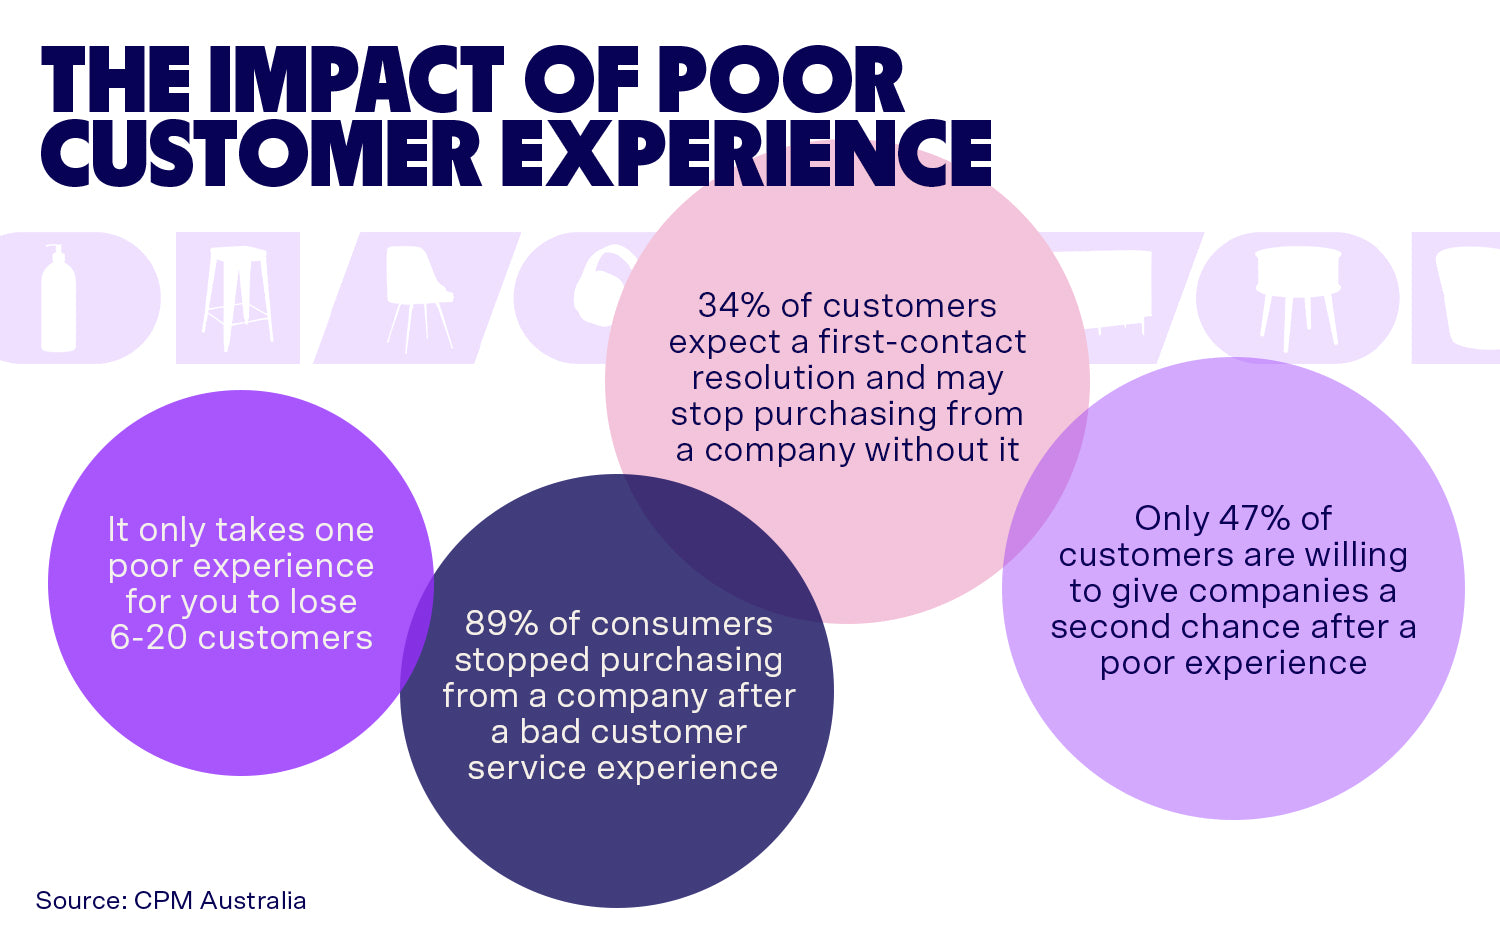 The impact of poor customer experience is high, as it only takes one bad customer service experience for a business to lose 6-20 customers.